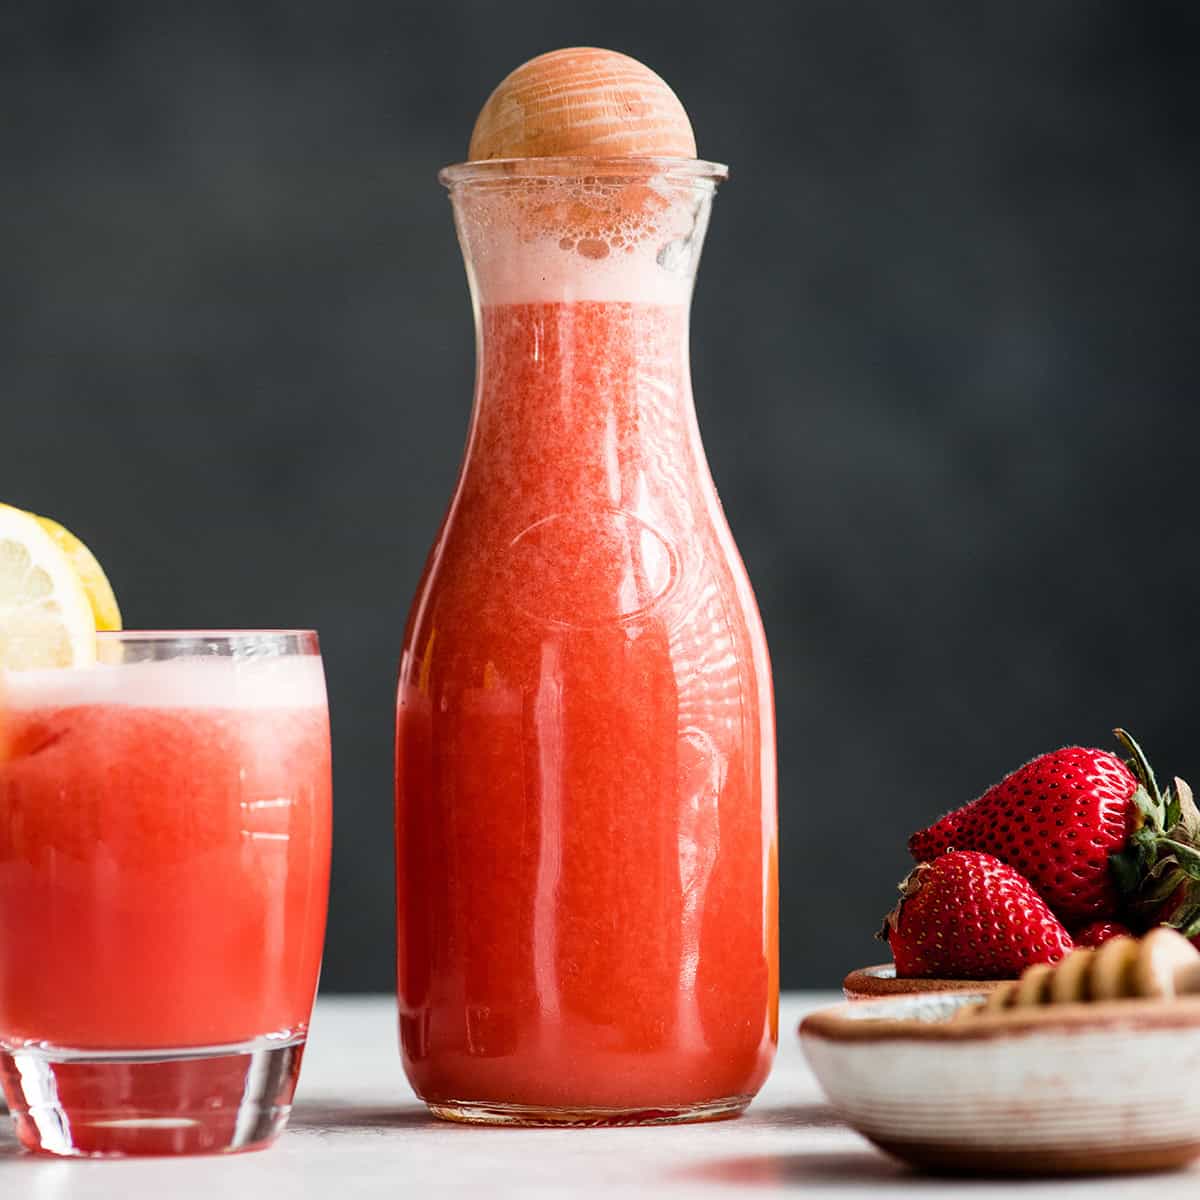 Homemade Strawberry Lemonade in a glass bottle and a glass